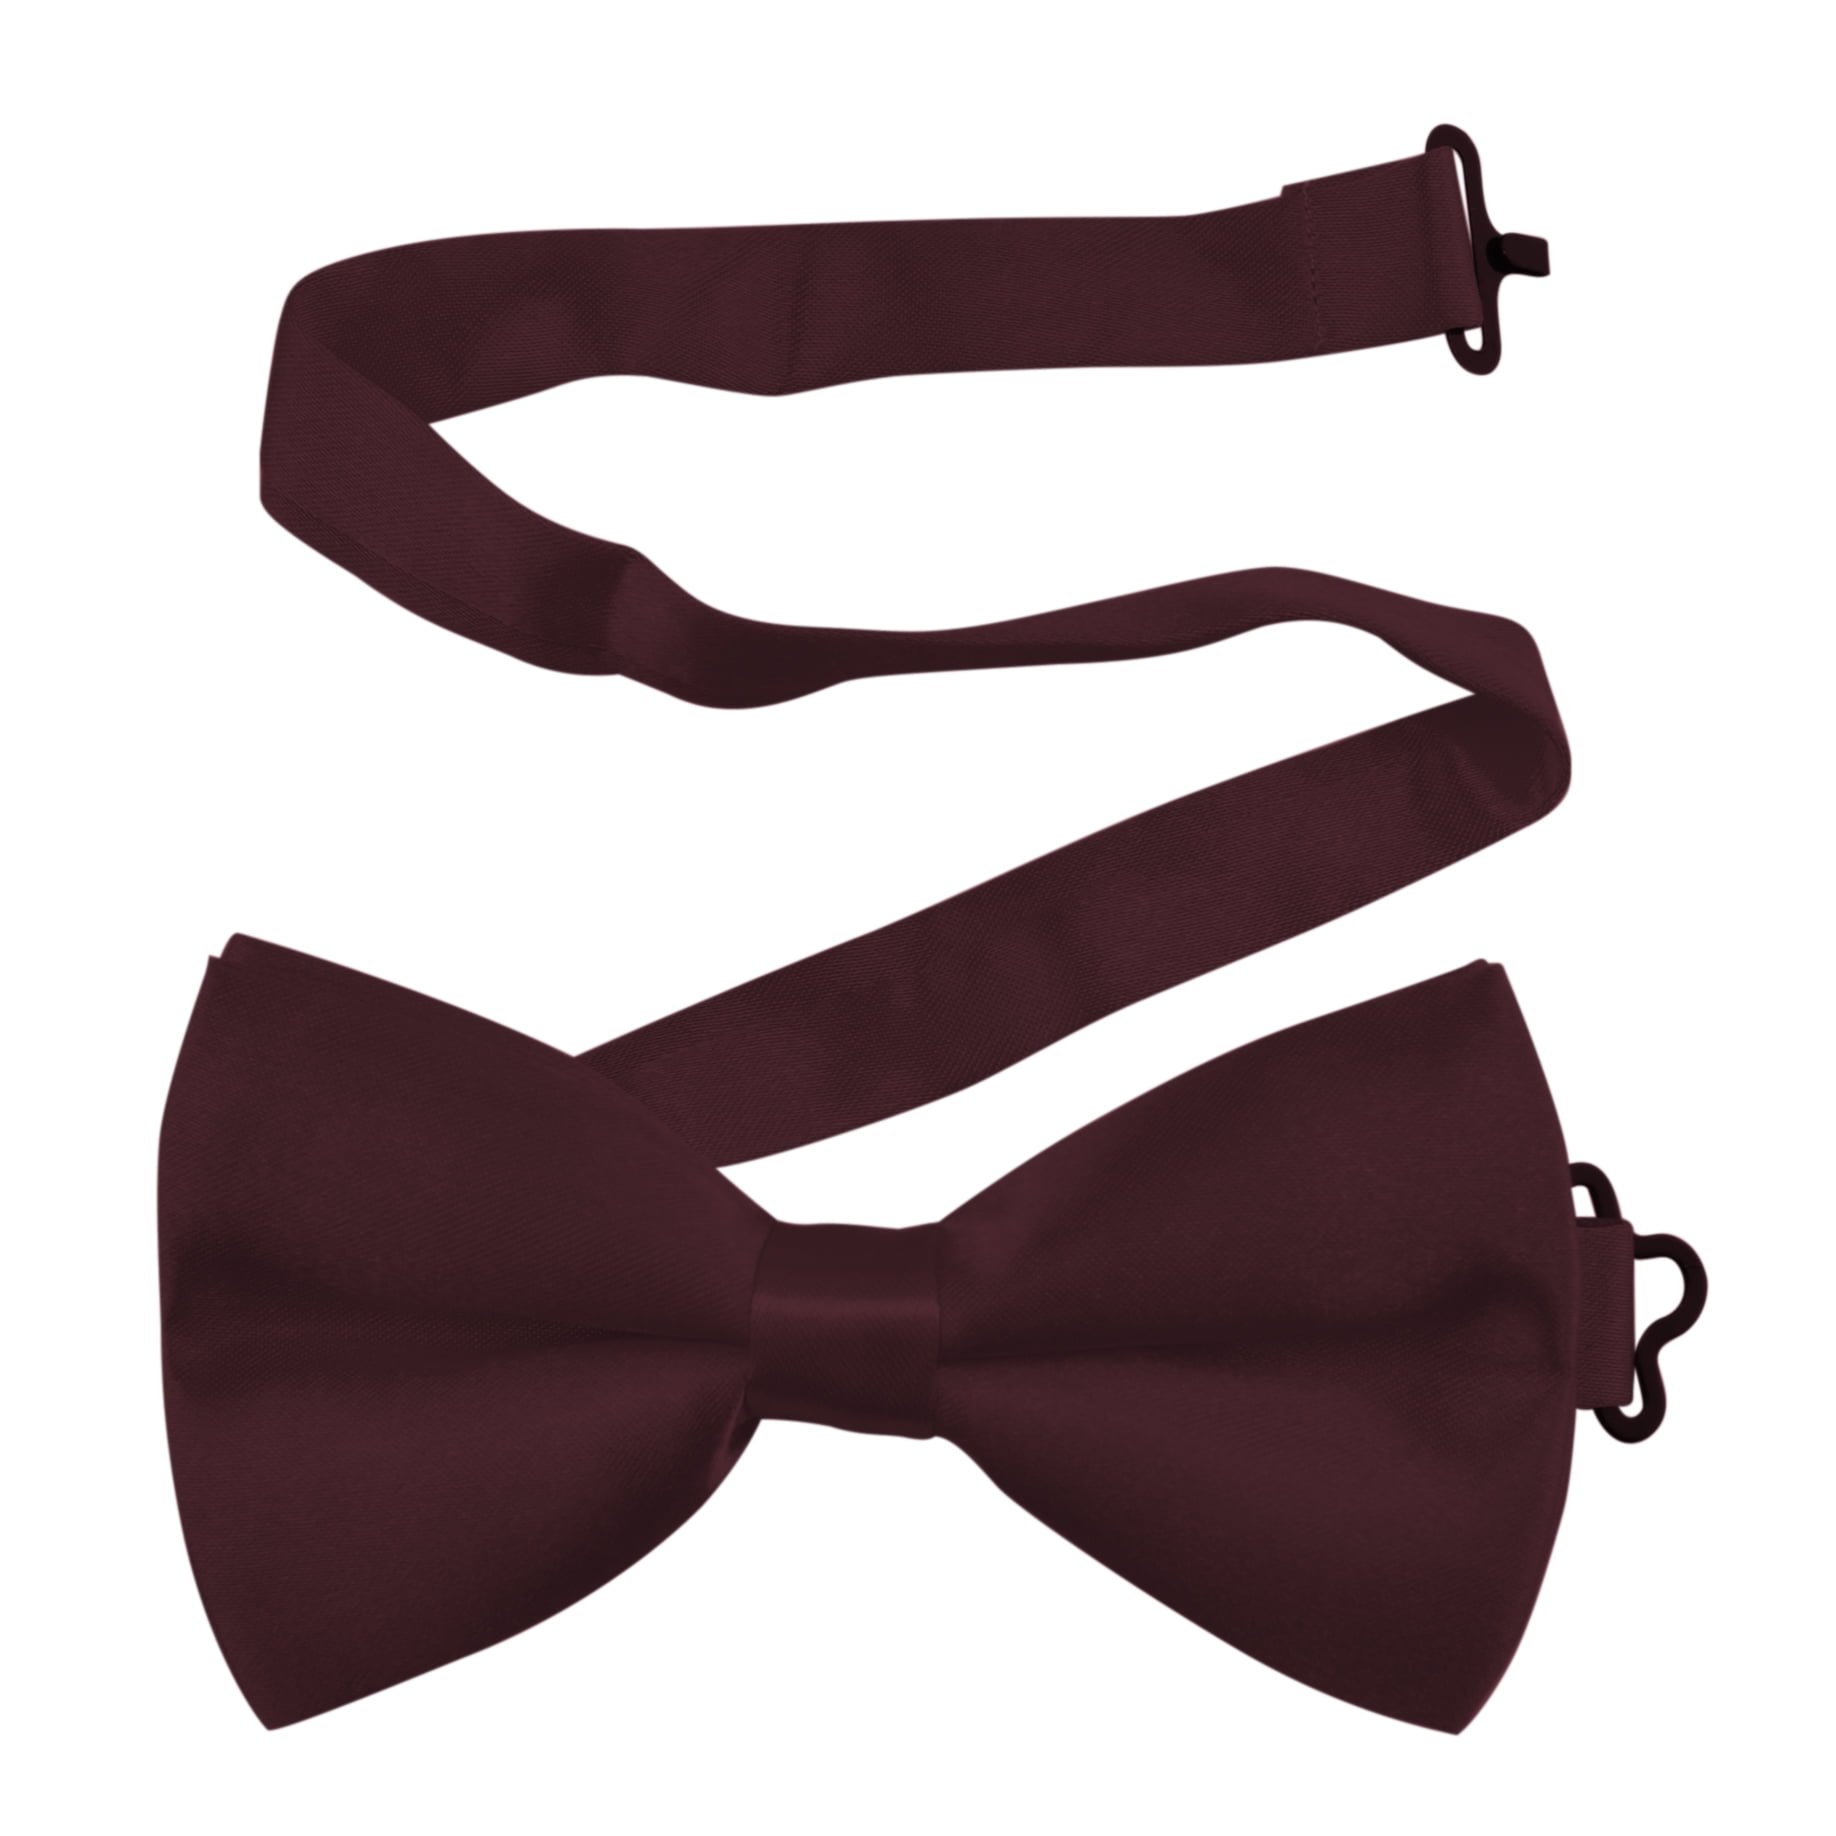 Formal Solid Banded Pre-Tied Boys Bow Ties-Burgundy